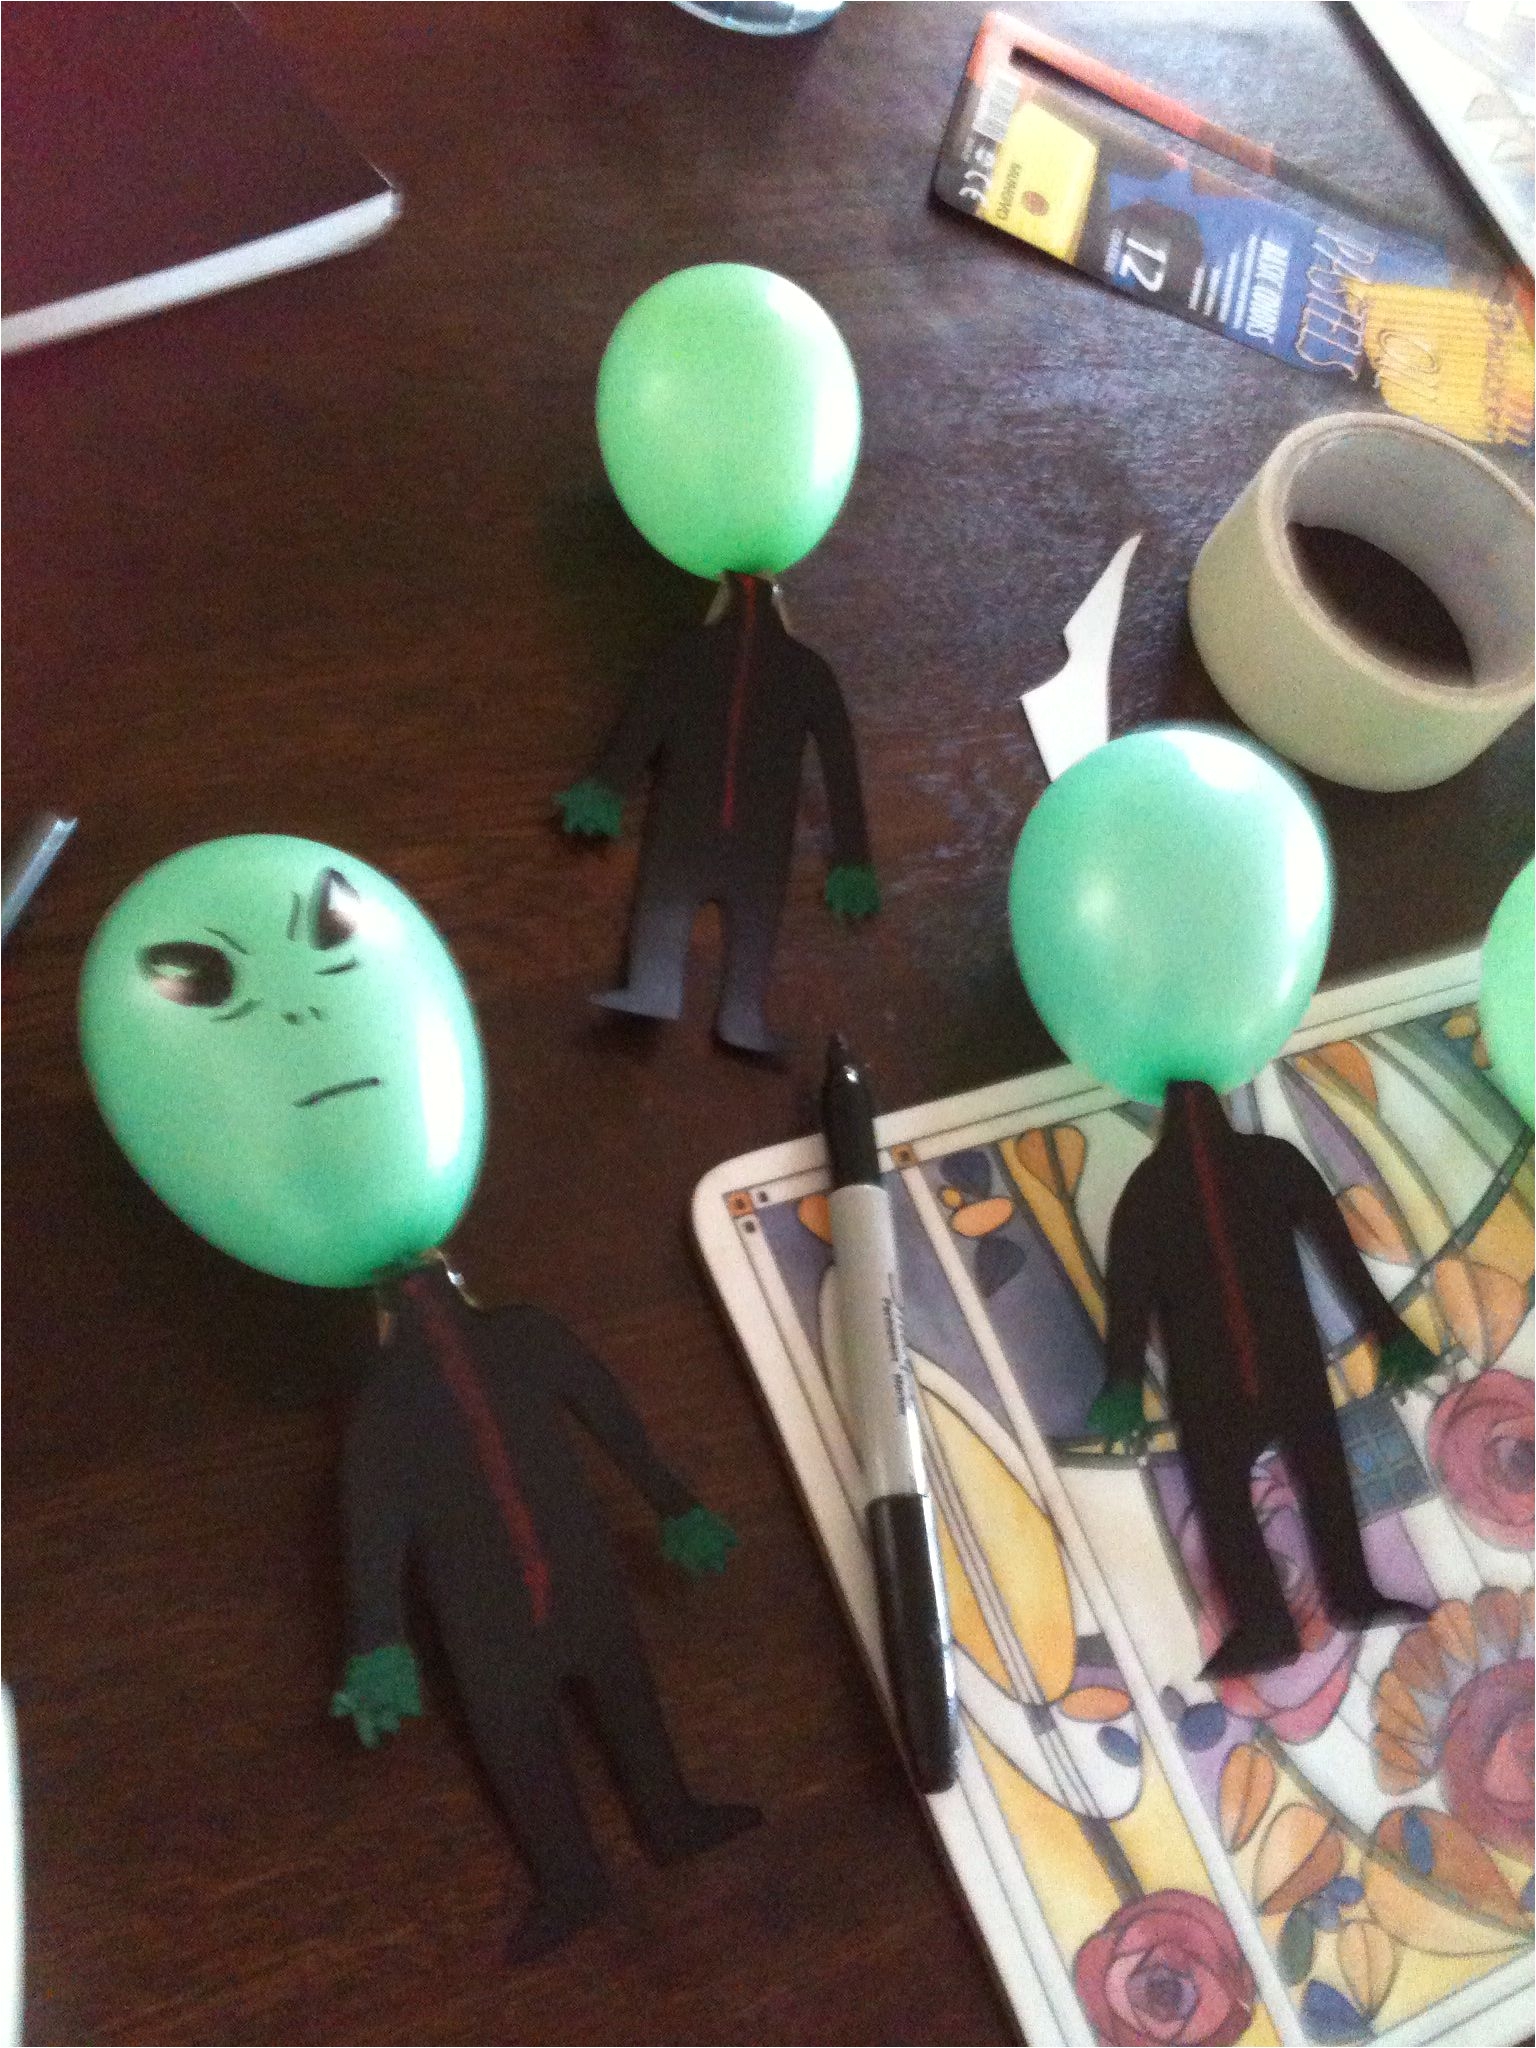 Alien Halloween Decorations Easy Aliens Made Out Of Balloons and Cardboard Great for Halloween